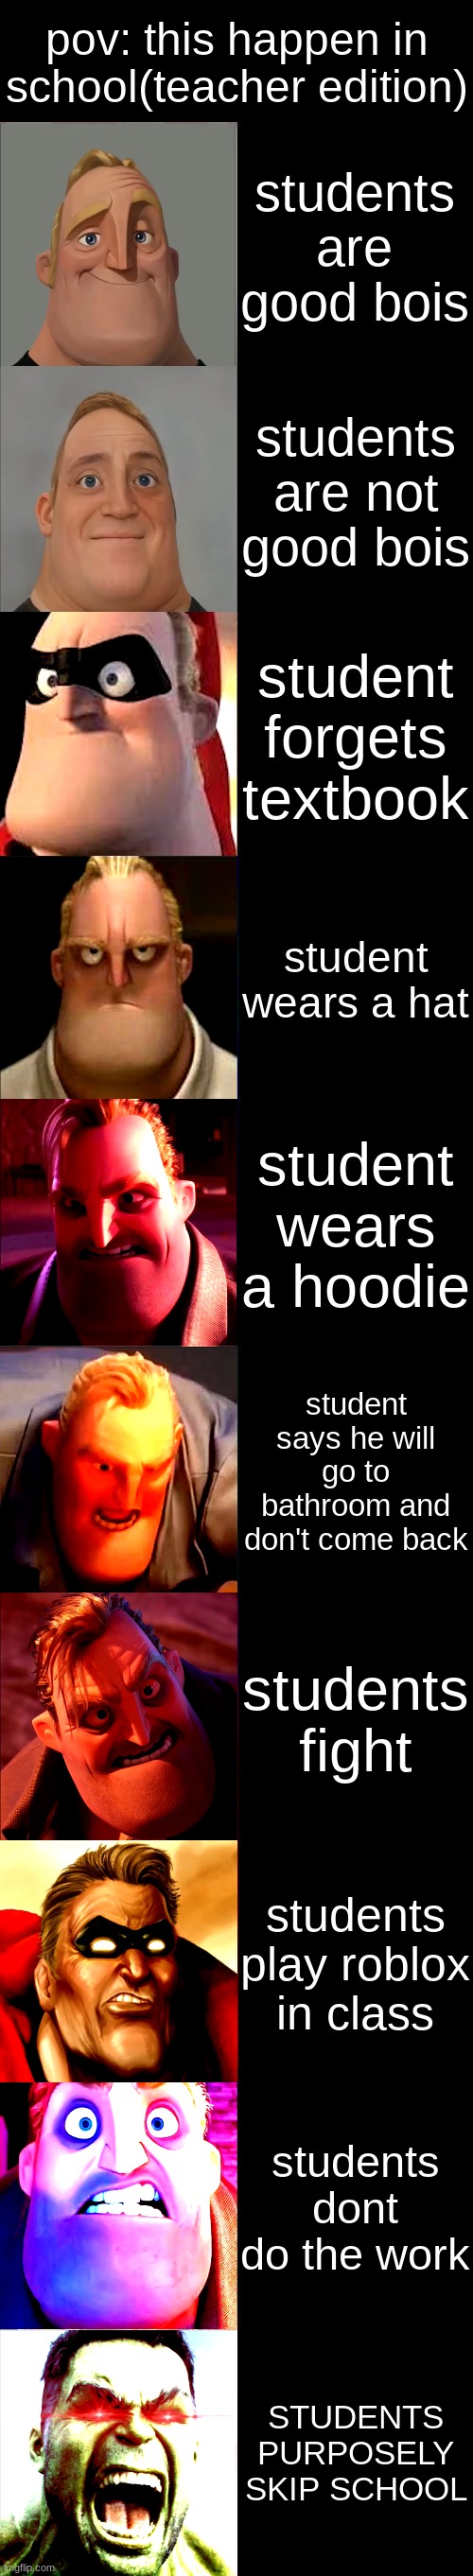 angry | pov: this happen in school(teacher edition); students are good bois; students are not good bois; student forgets textbook; student wears a hat; student wears a hoodie; student says he will go to bathroom and don't come back; students fight; students play roblox in class; students dont do the work; STUDENTS PURPOSELY SKIP SCHOOL | image tagged in mr incredible becoming angry | made w/ Imgflip meme maker